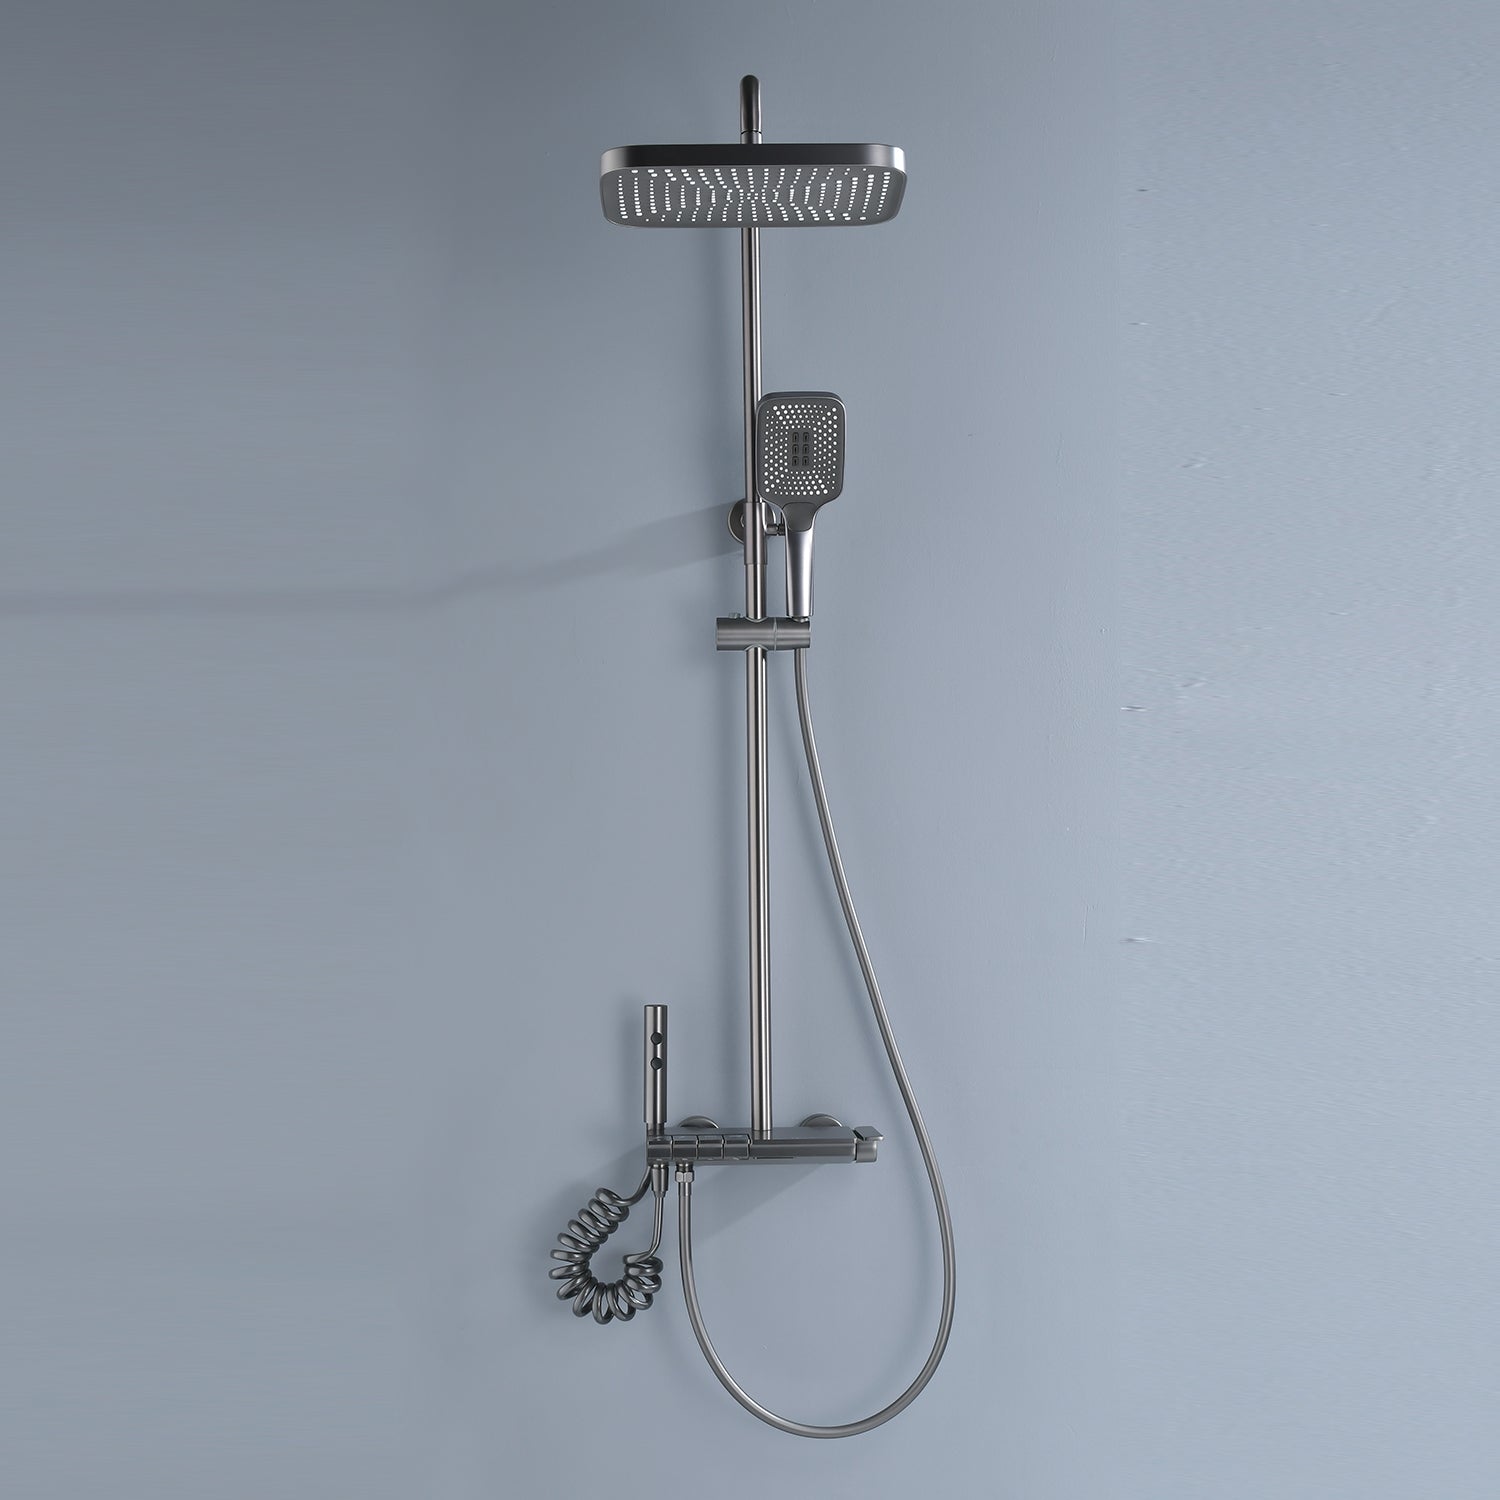 Lefton Shower System with 4 Water Outlet Modes-SS2202